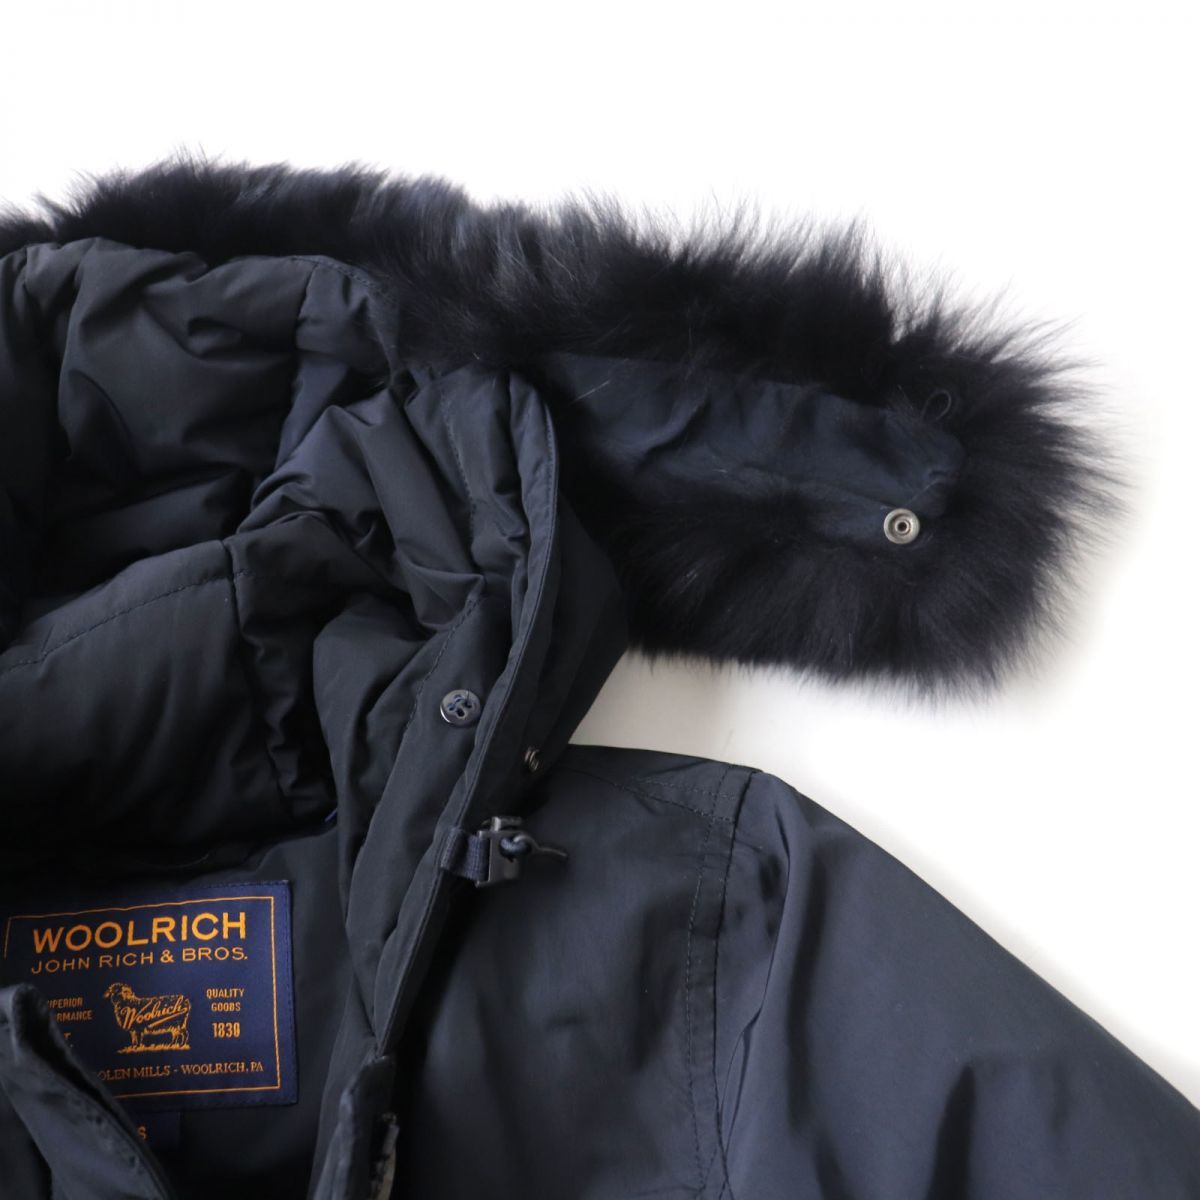  superior article * regular goods Woolrich 1602165 LUXURY ARCTIC PARKA ZIP UP Logo button attaching fox down coat with fur navy blue XS Japan size S corresponding 